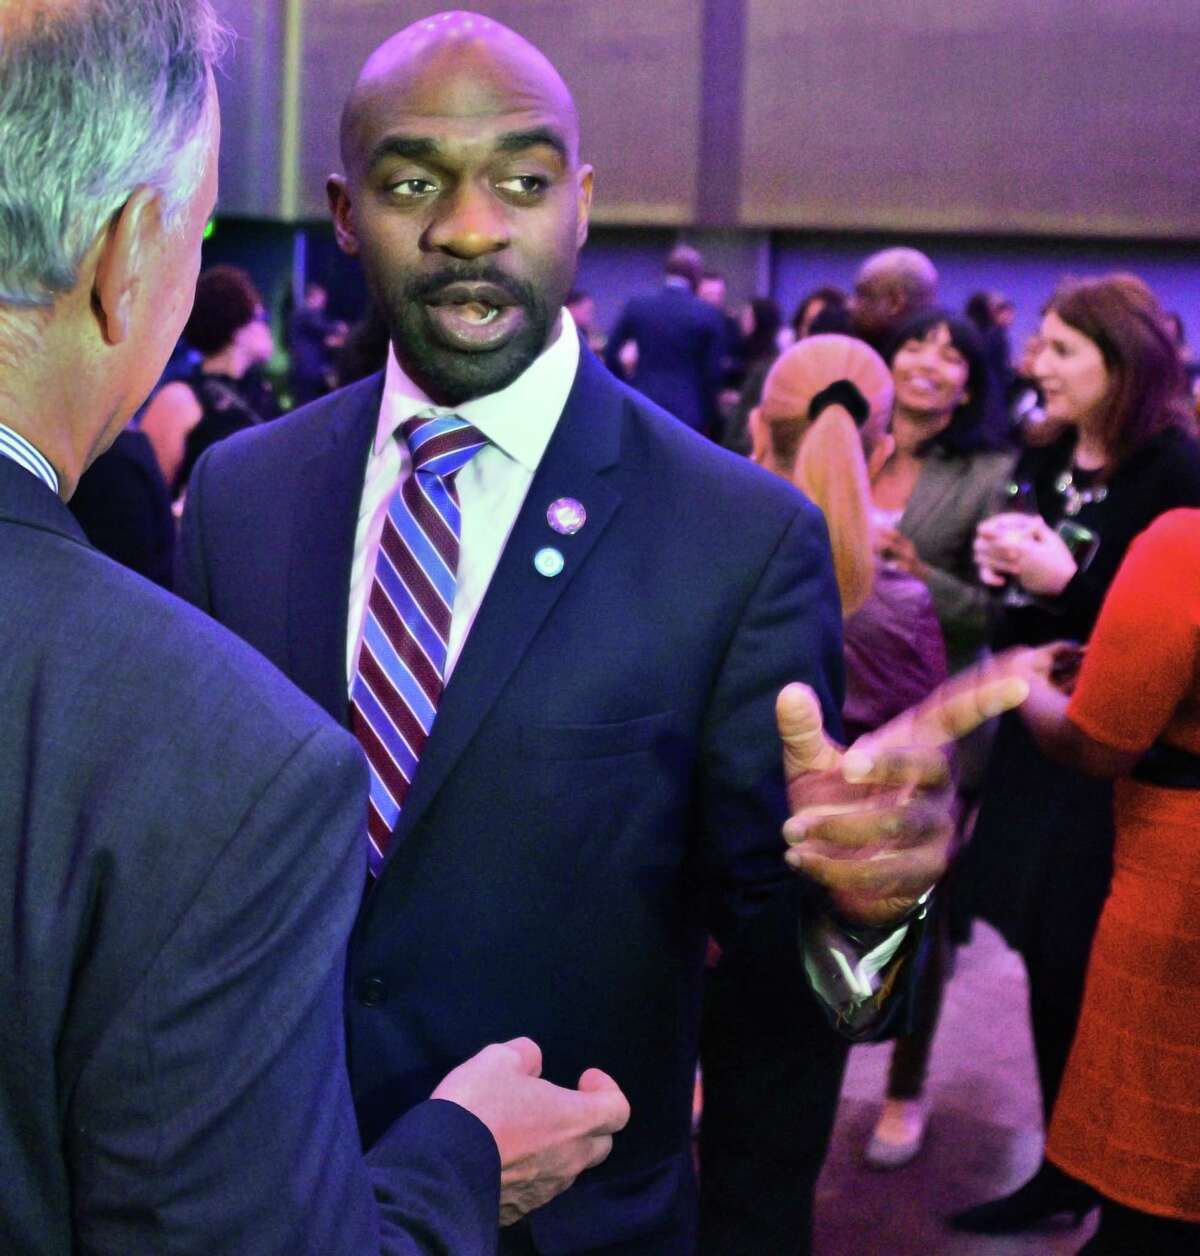 Assemblyman Michael Blake speaks with attendees during a reception for the NYS Association of Black and Puerto Rican Legislators' (NYSABPRL) 47th Annual Legislative Conference at the Albany Capital Center Friday Feb. 16, 2018 in Albany, NY. (John Carl D'Annibale/Times Union)